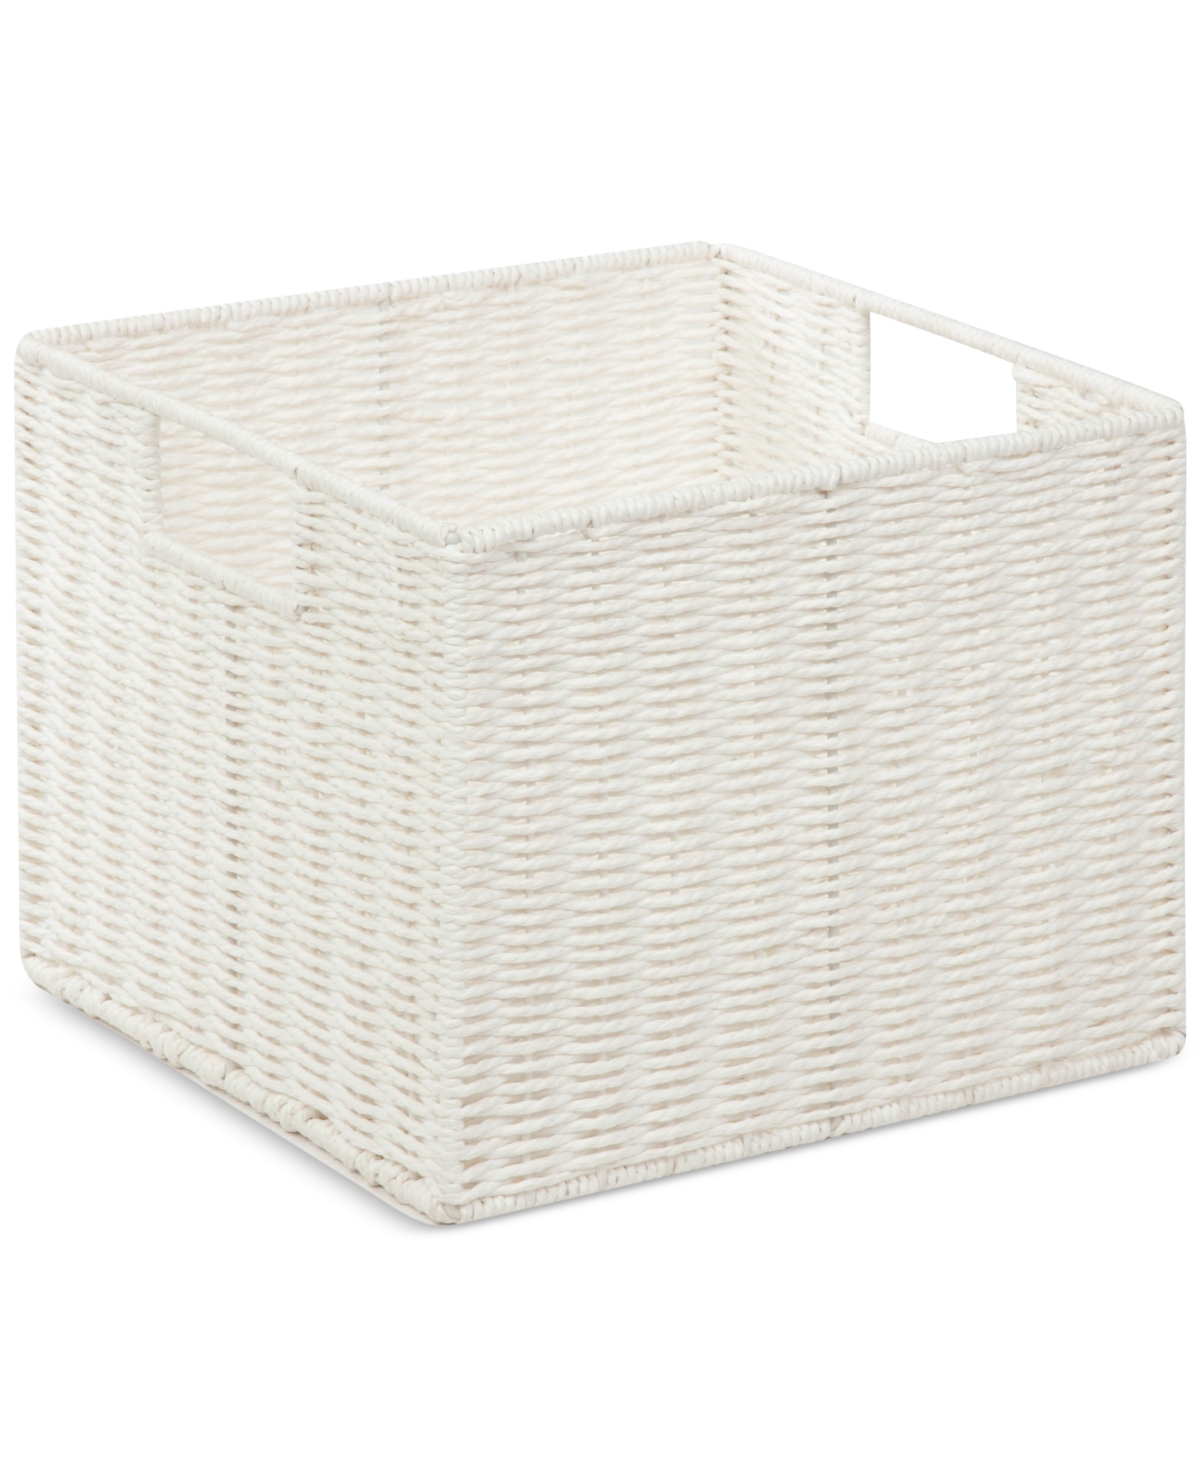 Honey-Can-Do Parchment Cord Storage Basket - White